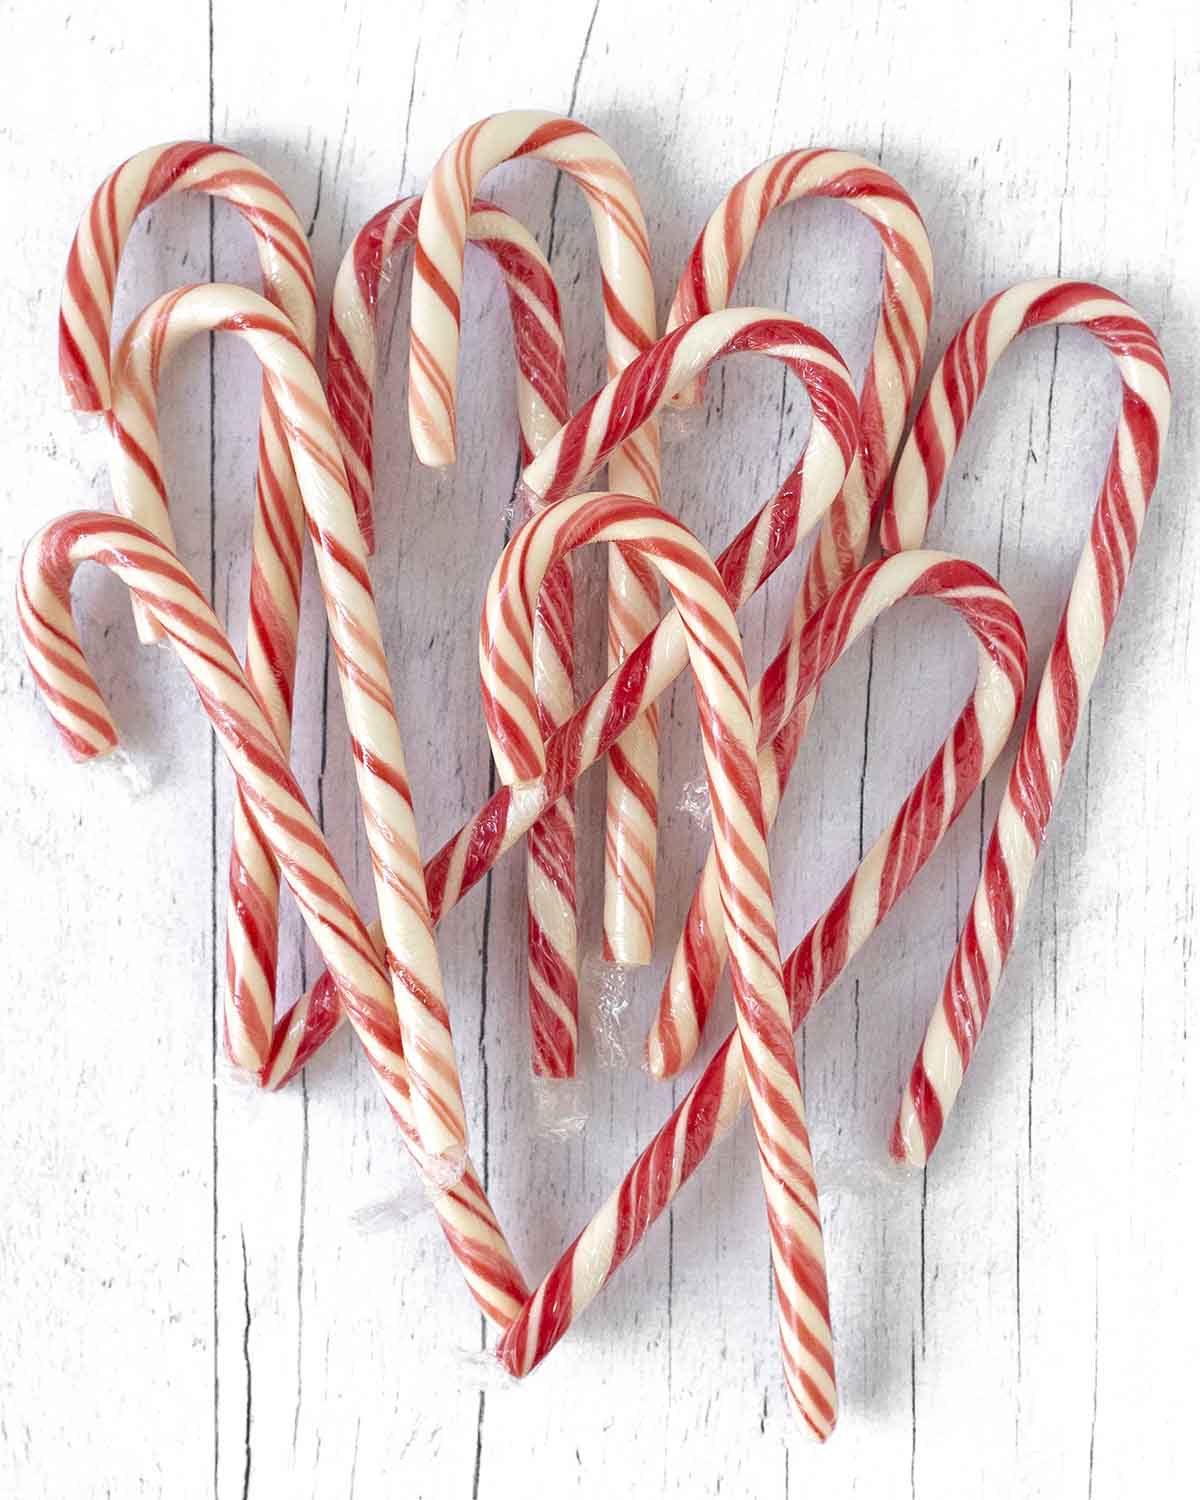 An overhead shot showing candy canes scattered on a white wooden table.